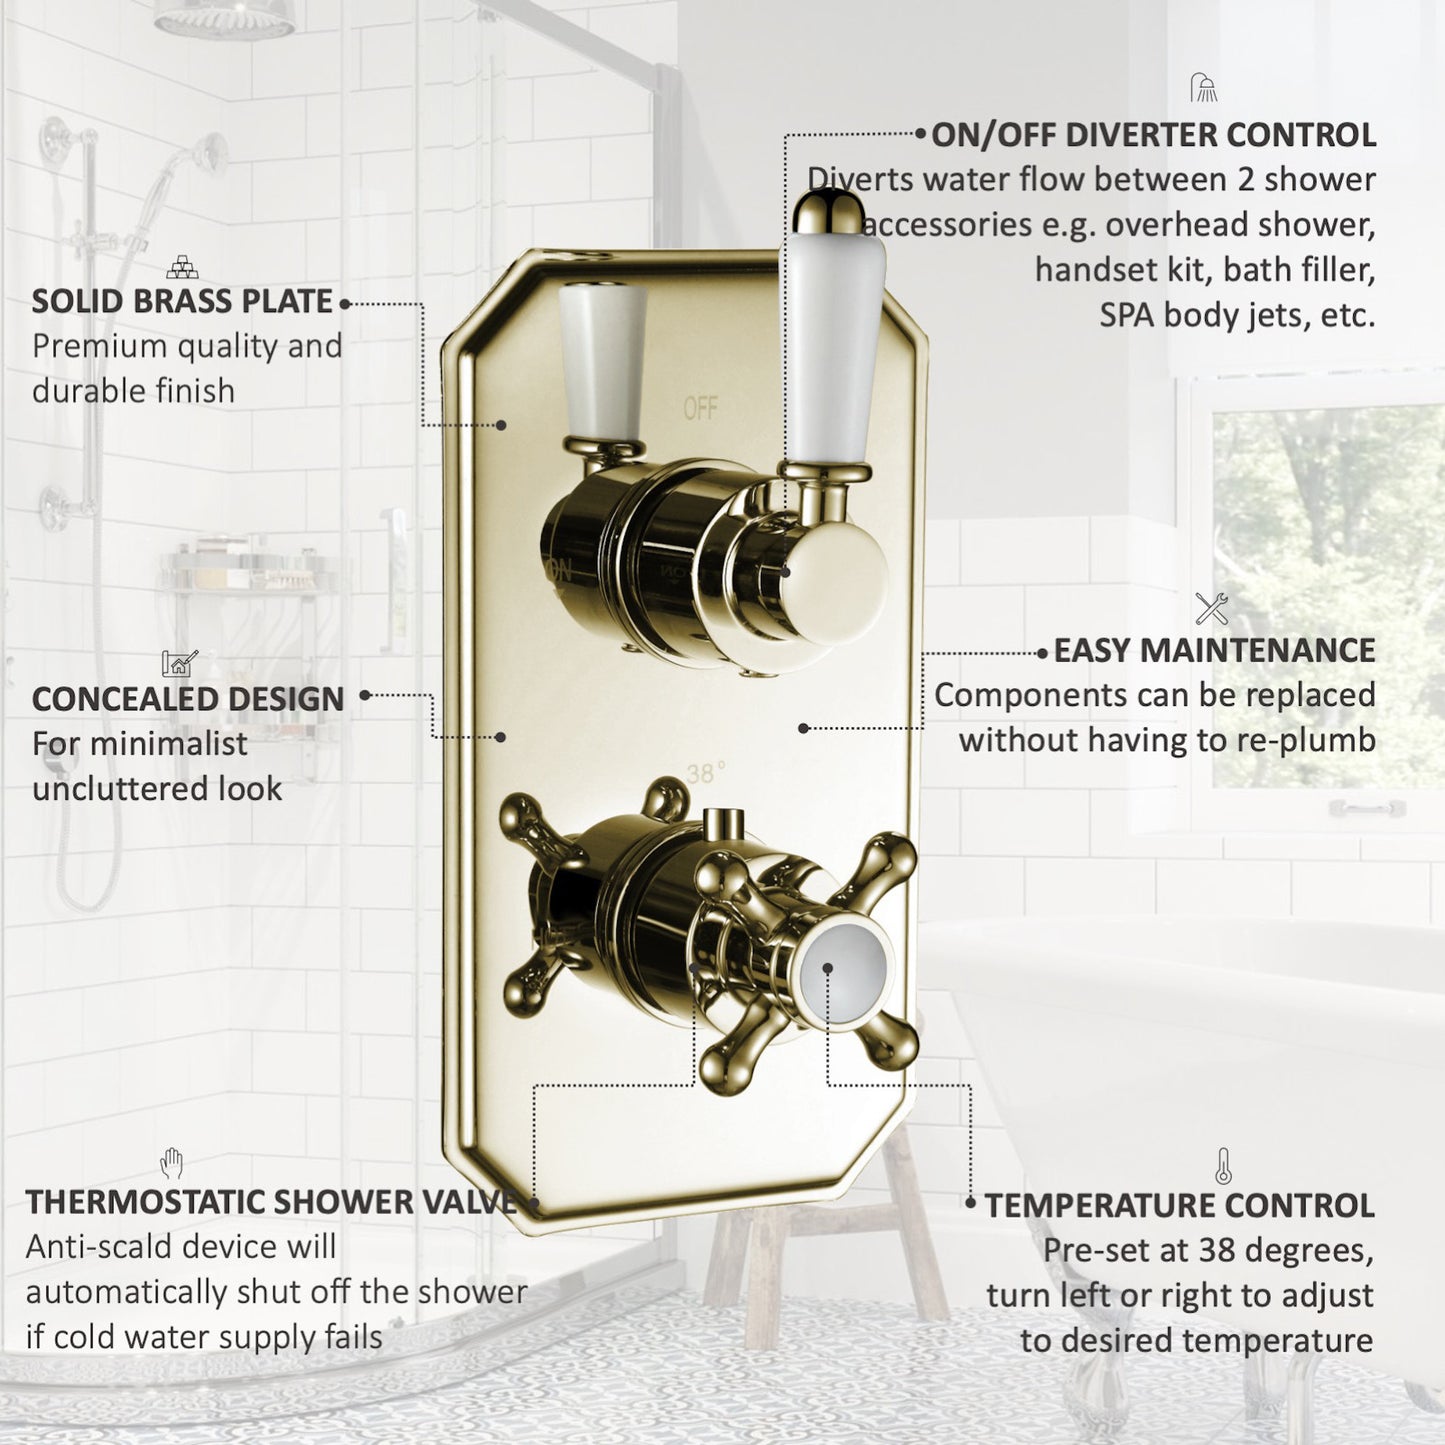 Regent Traditional Crosshead And White Lever Concealed Thermostatic Shower Set Incl. Twin Valve, Wall Fixed 8" Shower Head, Handshower Kit - Gold (2 Outlet)